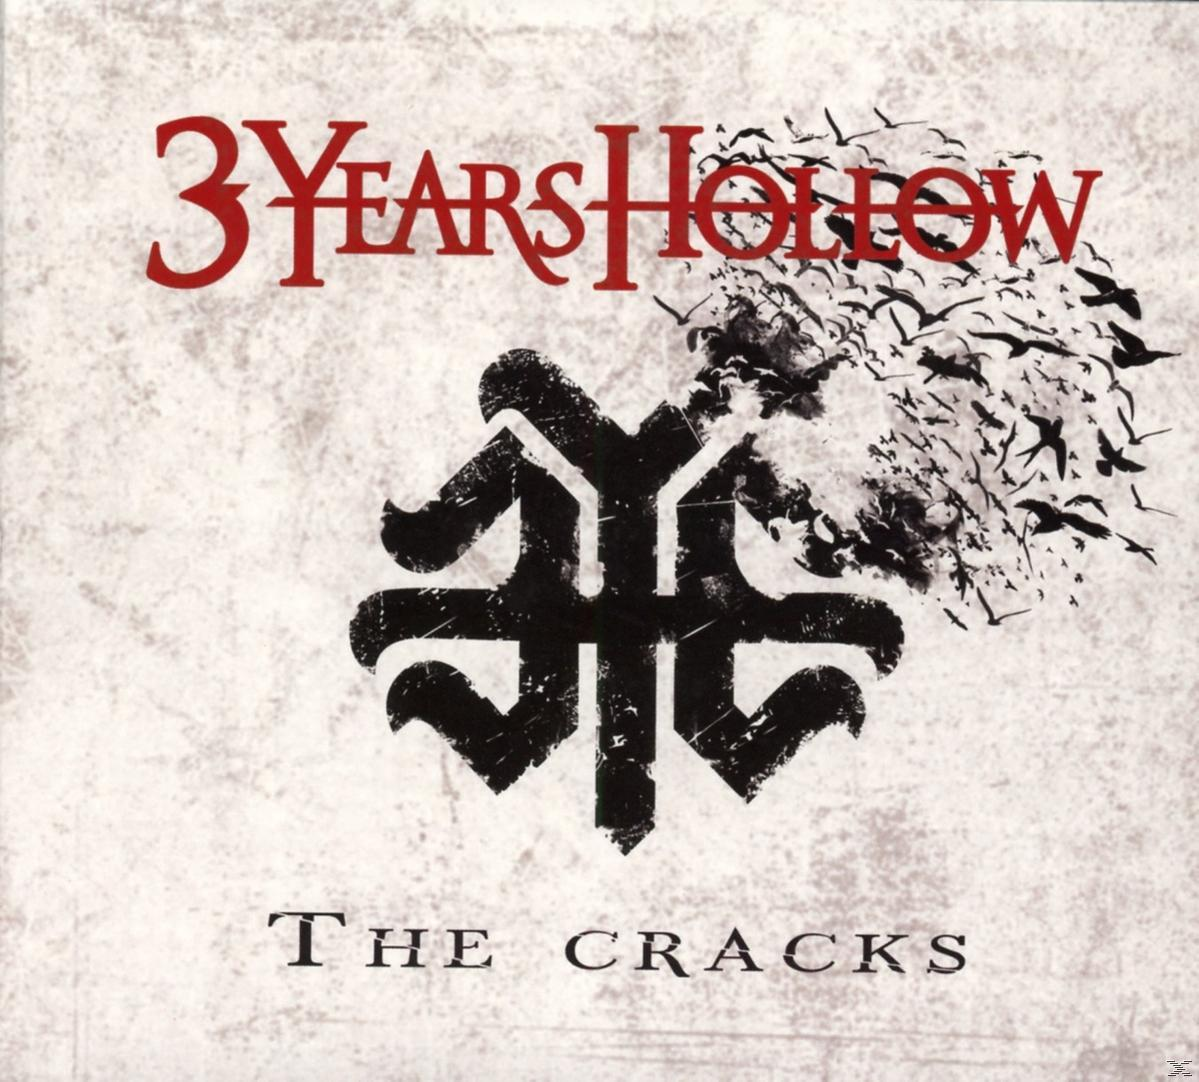 (CD) The Hollow - 3 Years - Cracks